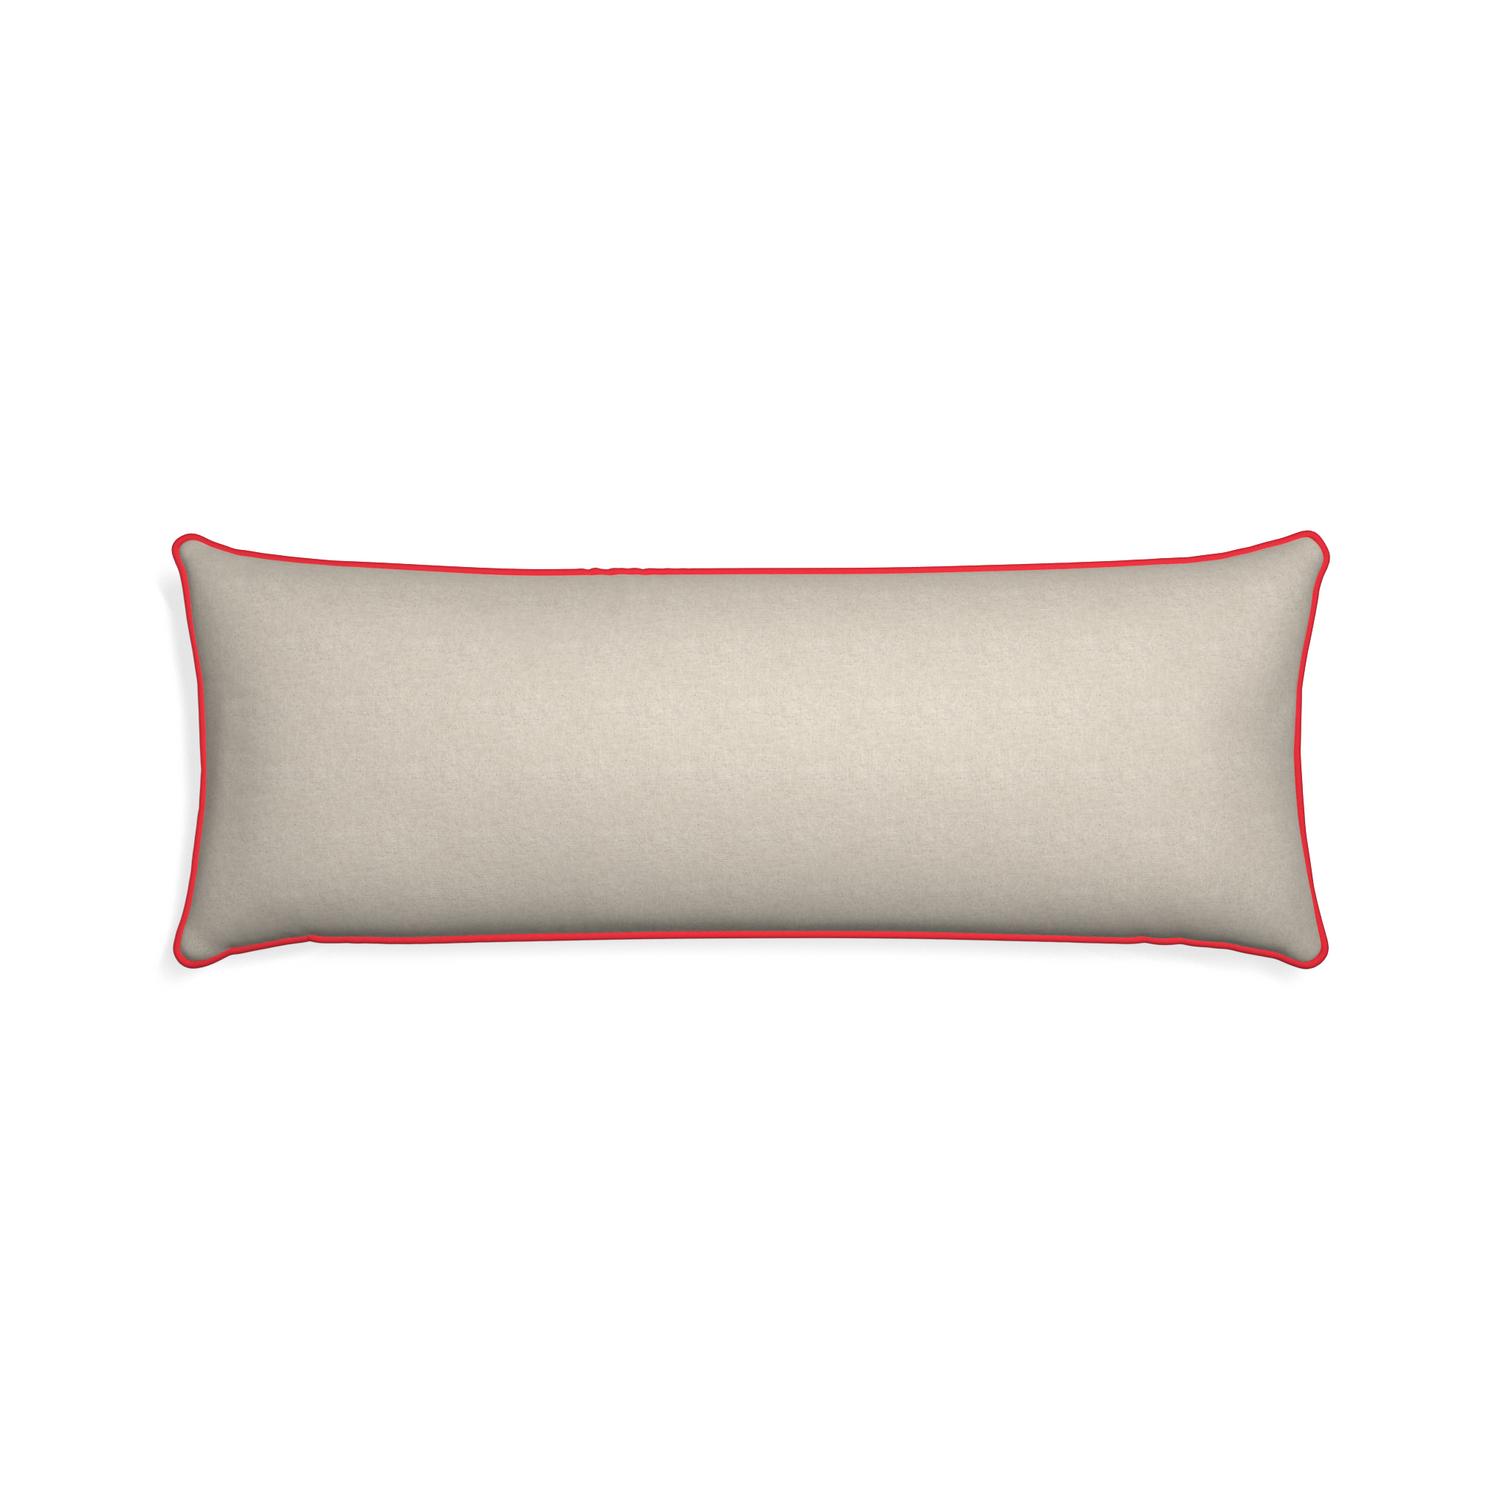 Xl-lumbar oat custom light brownpillow with cherry piping on white background